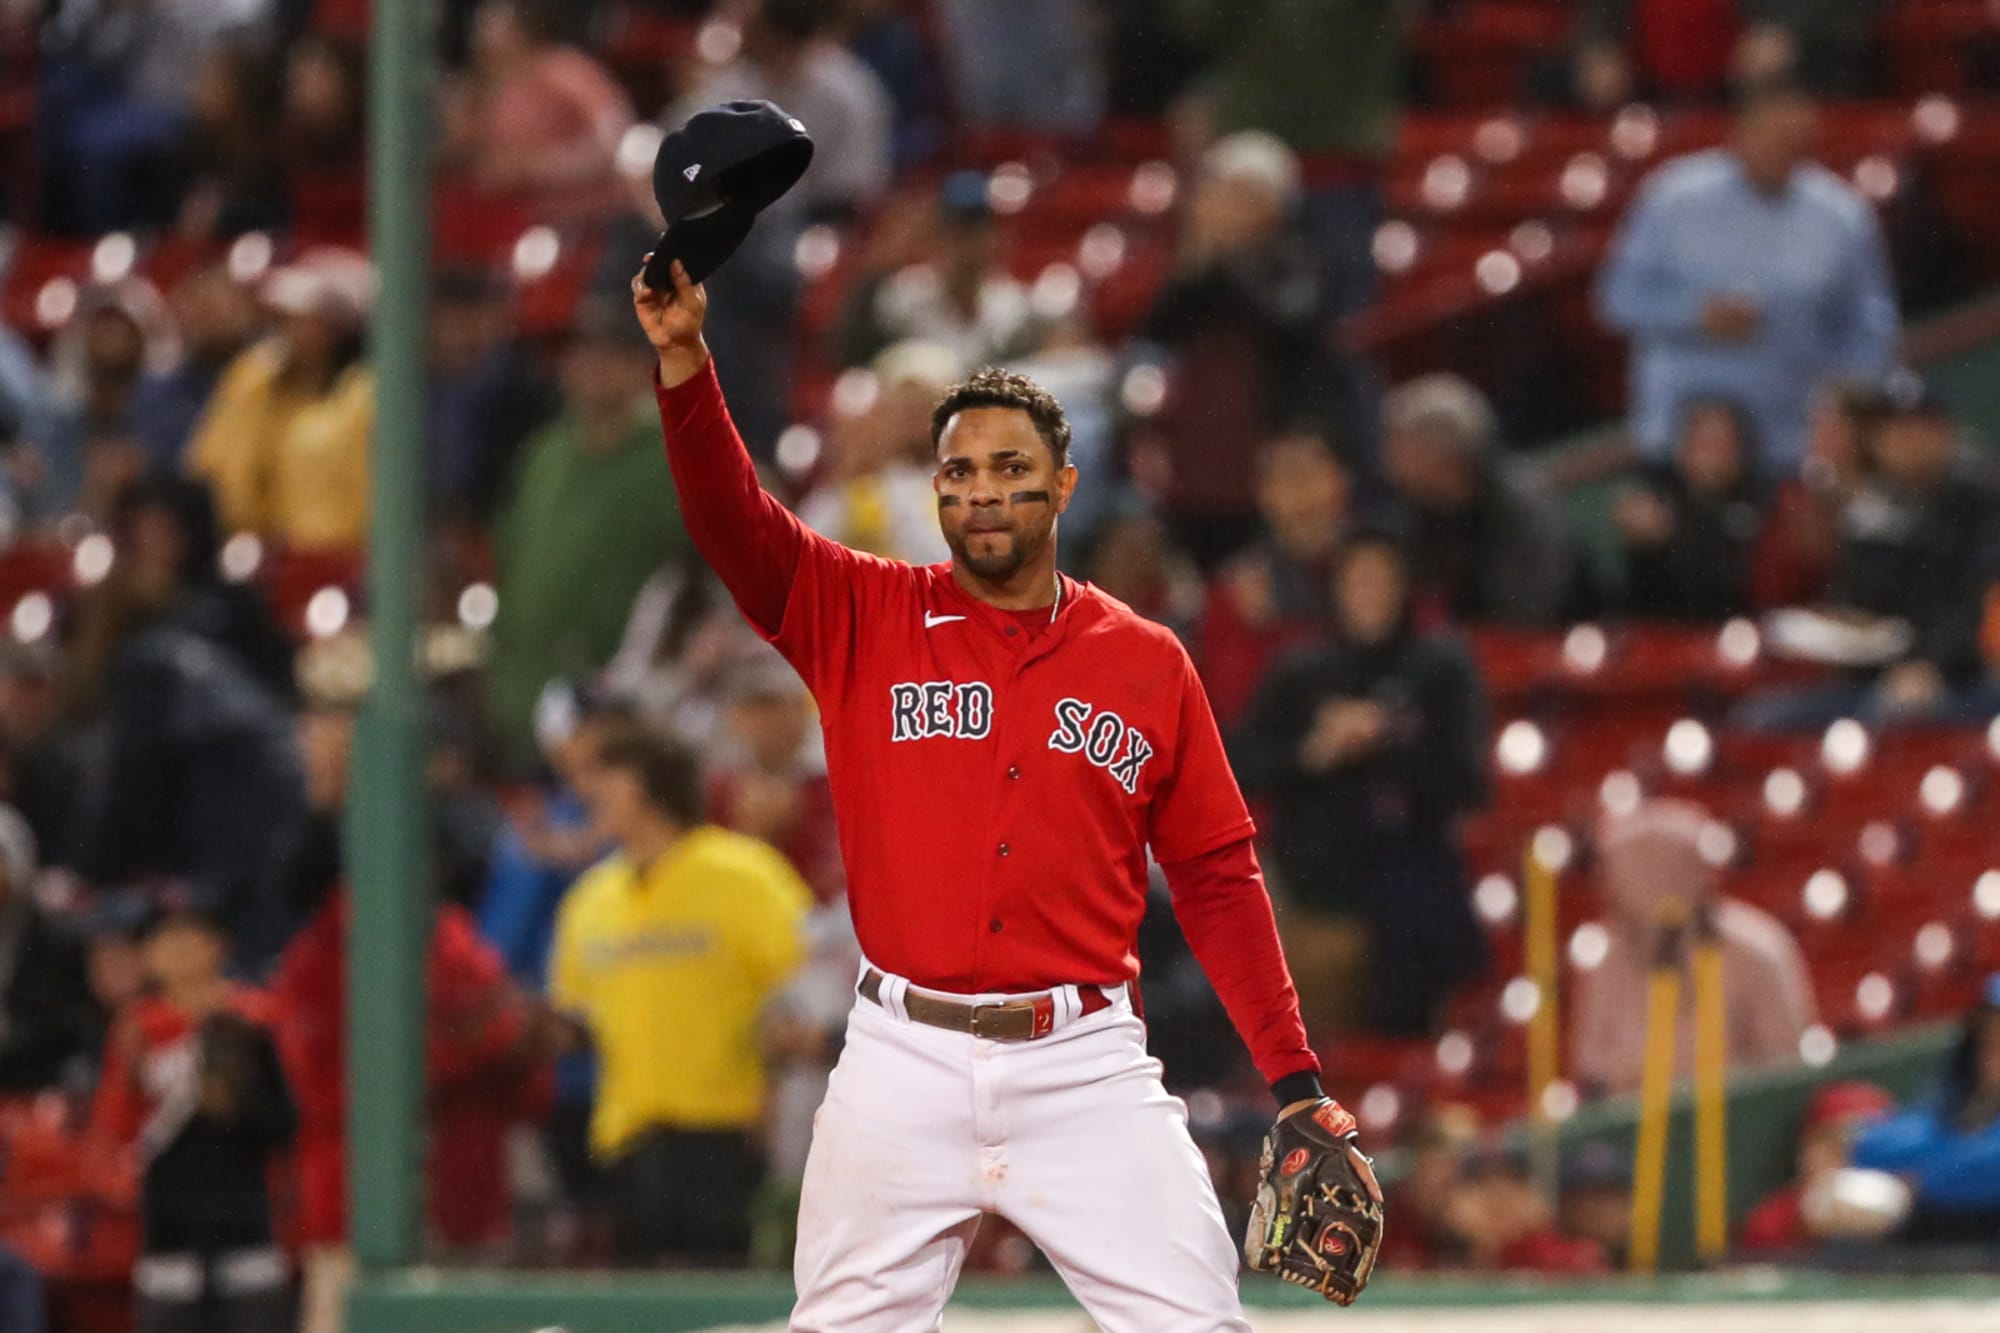 Buckley: Xander Bogaerts disaster shows how Red Sox have lost